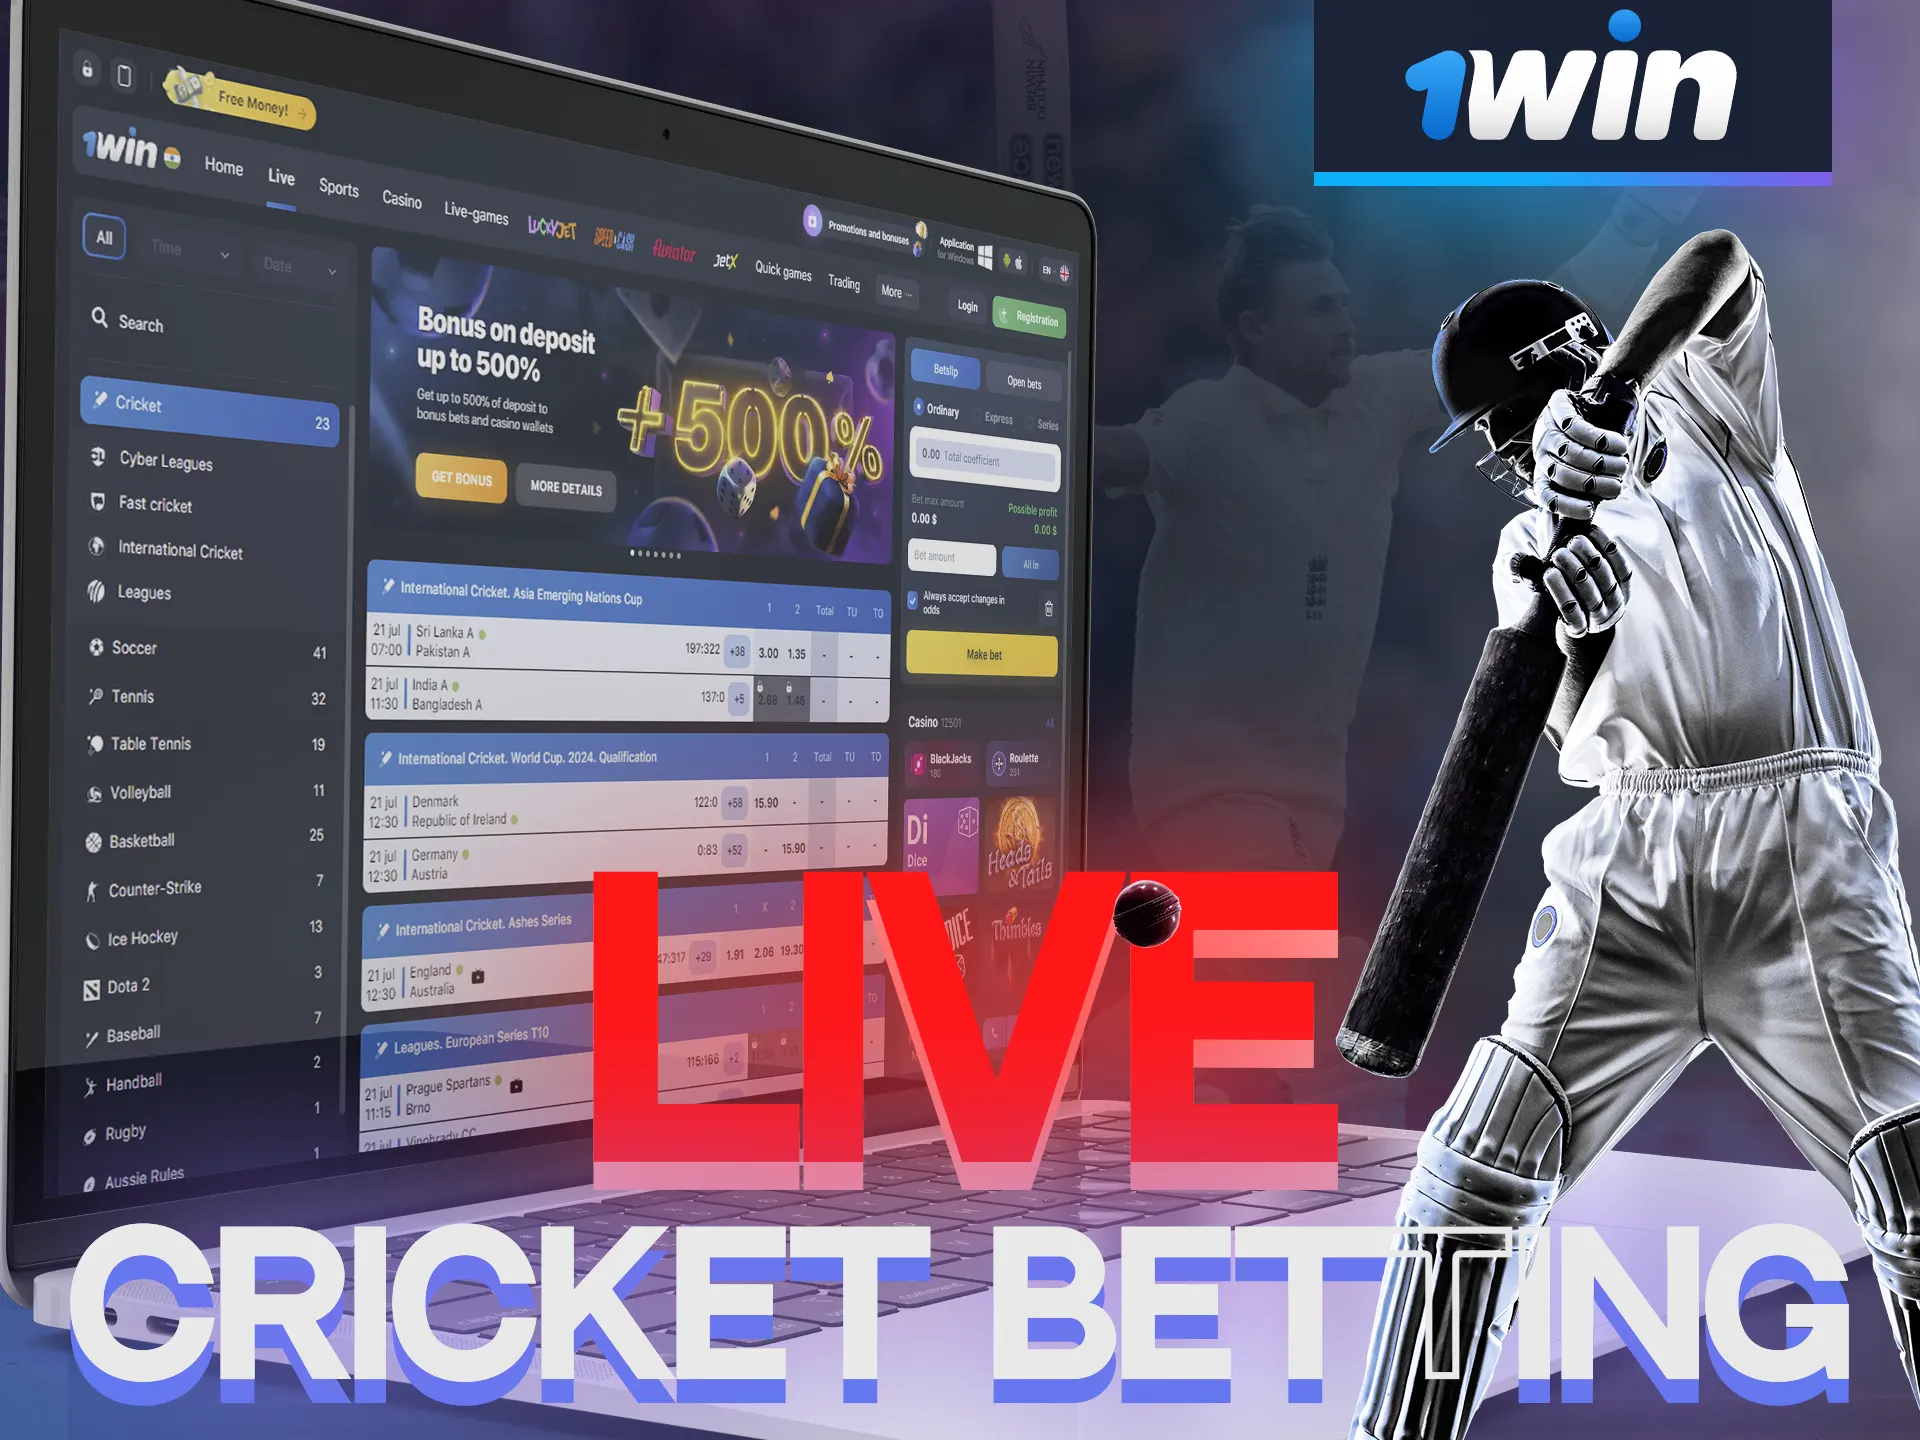 On 1win, you can bet on live cricket matches as well.